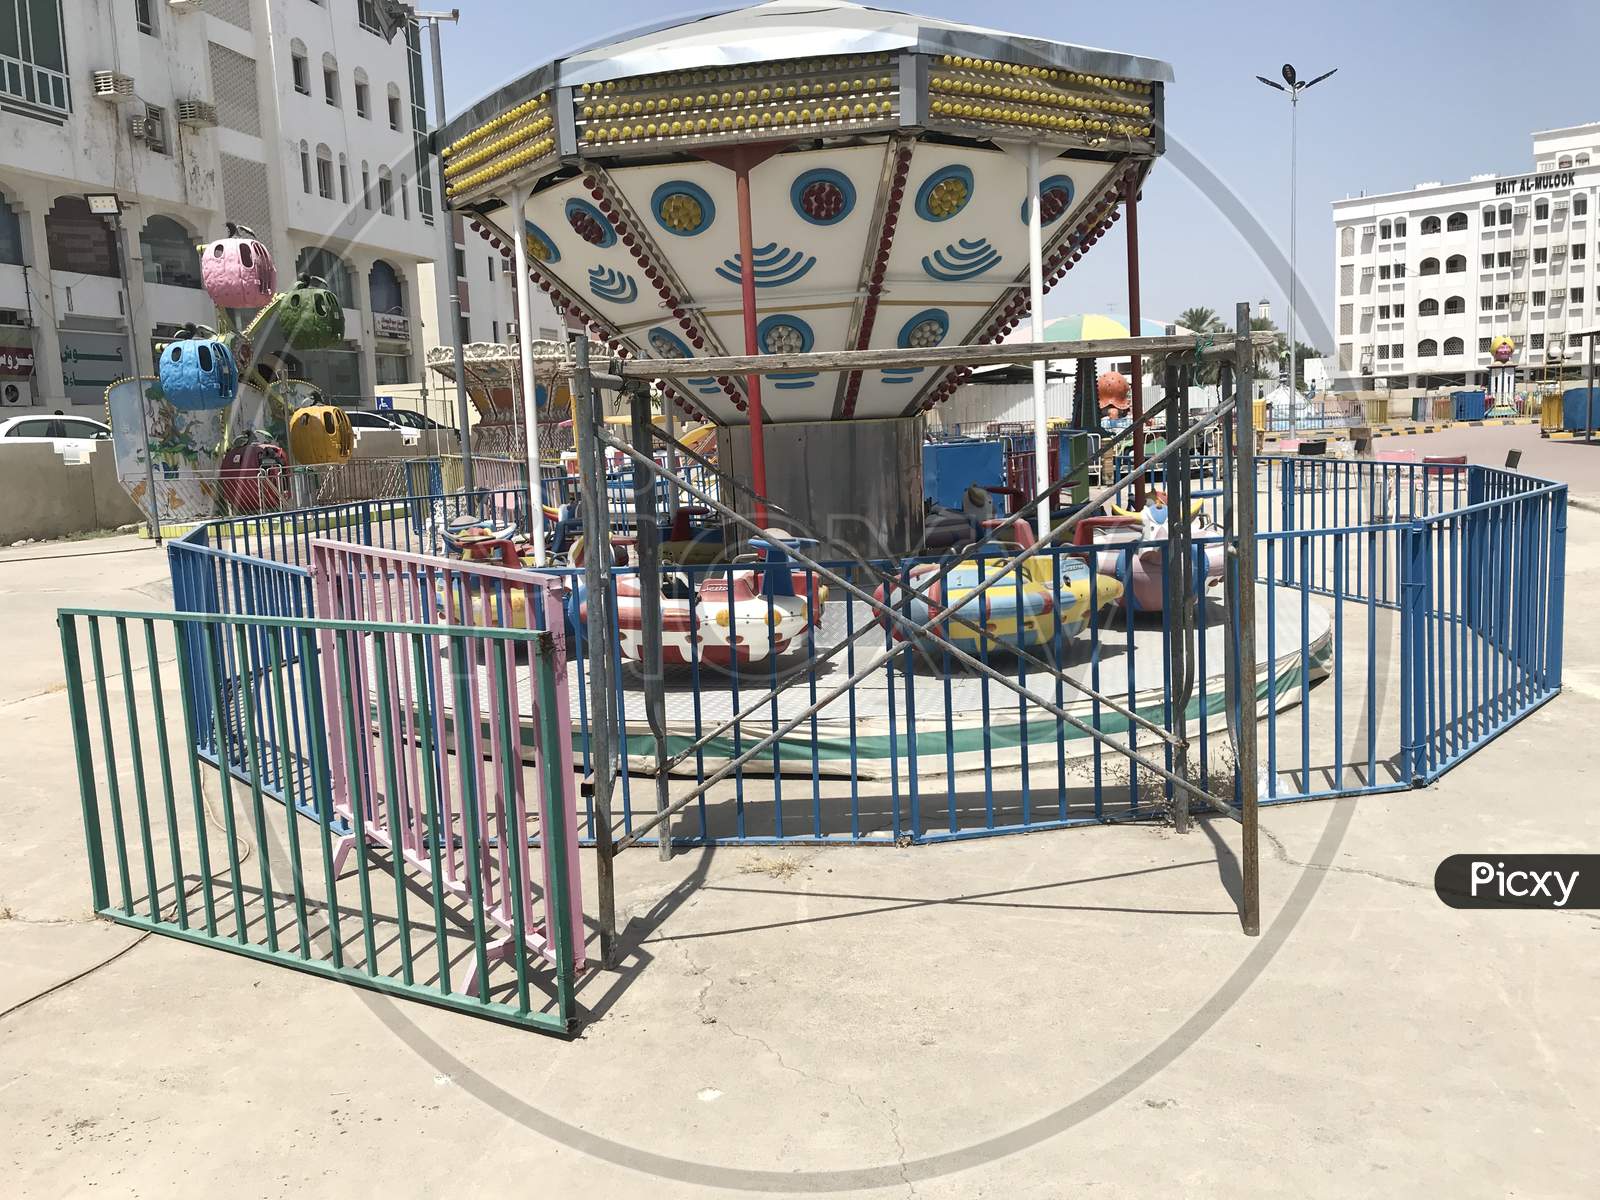 Amusement Theme Park Installed For Children Park To Celebrate Their Weekend Holidays At City Center Location